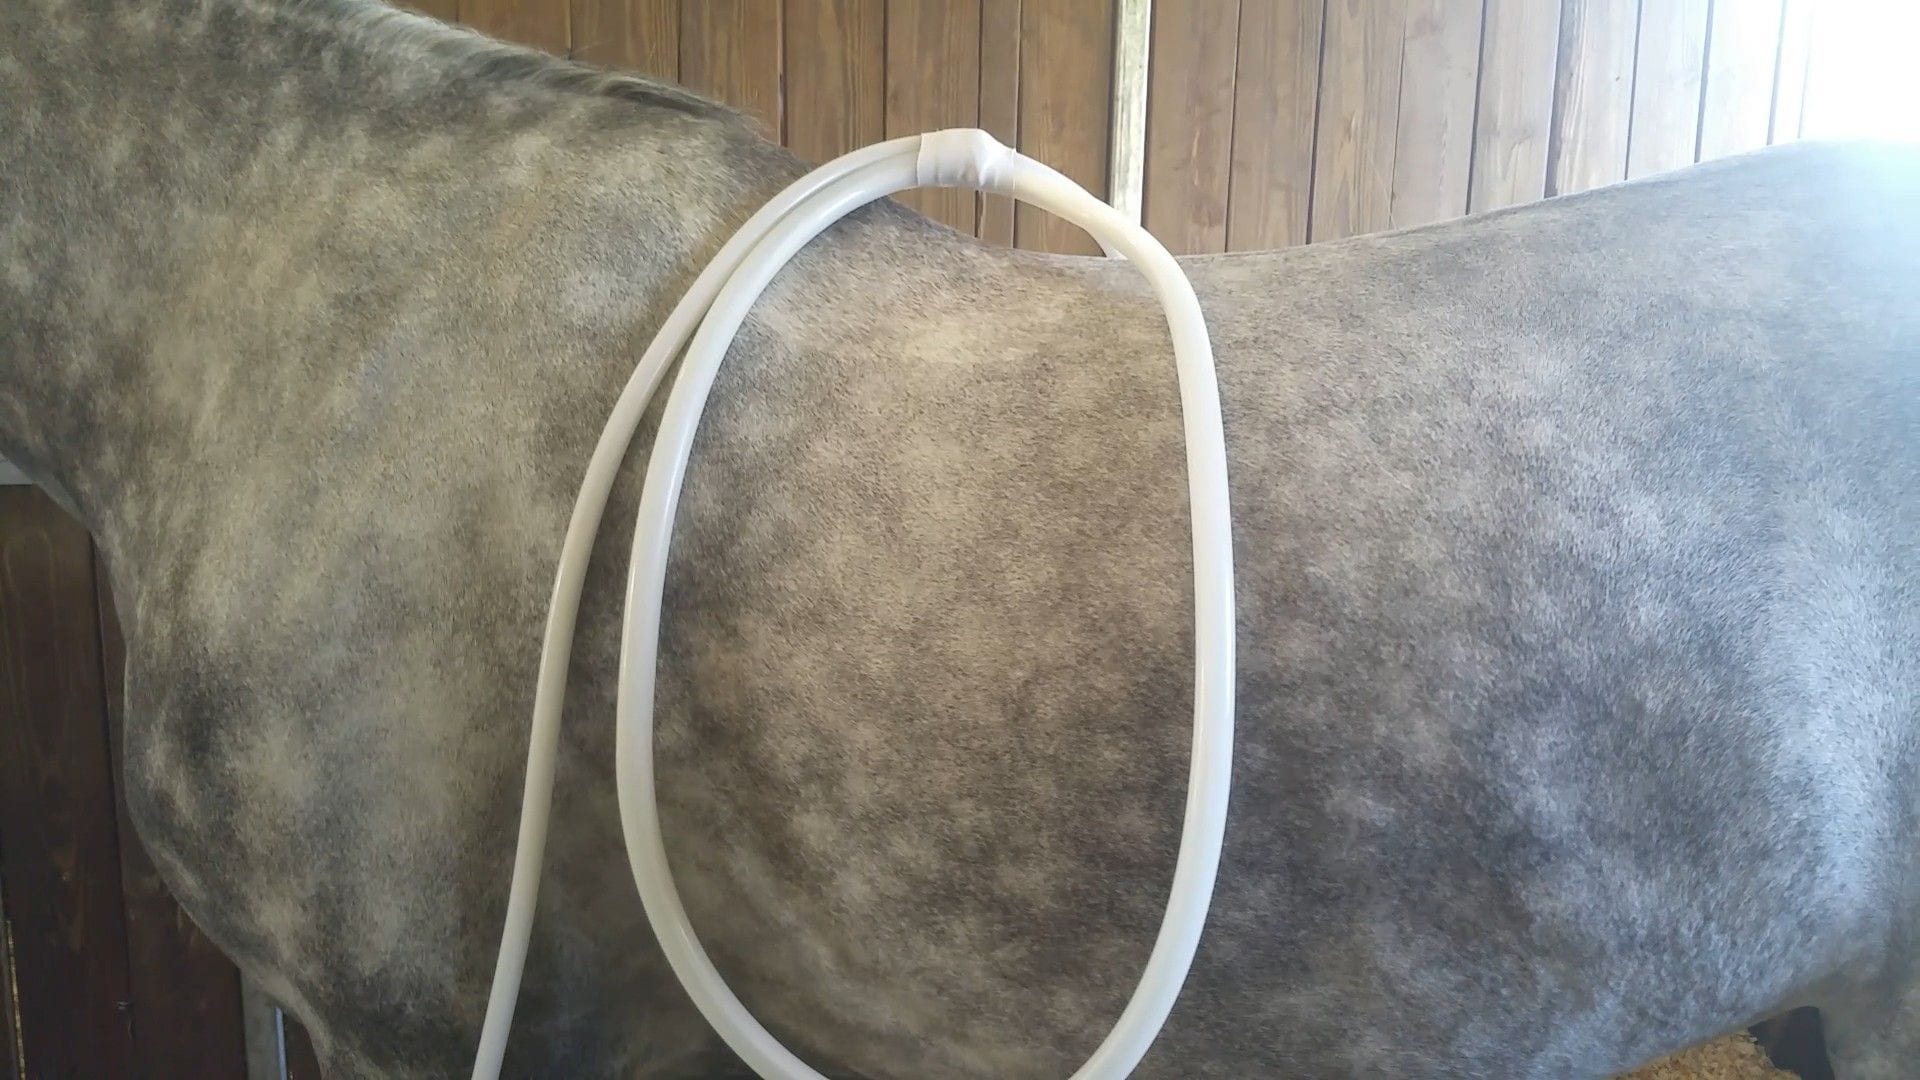 MAGNAWAVE FOR COLIC IN HORSES